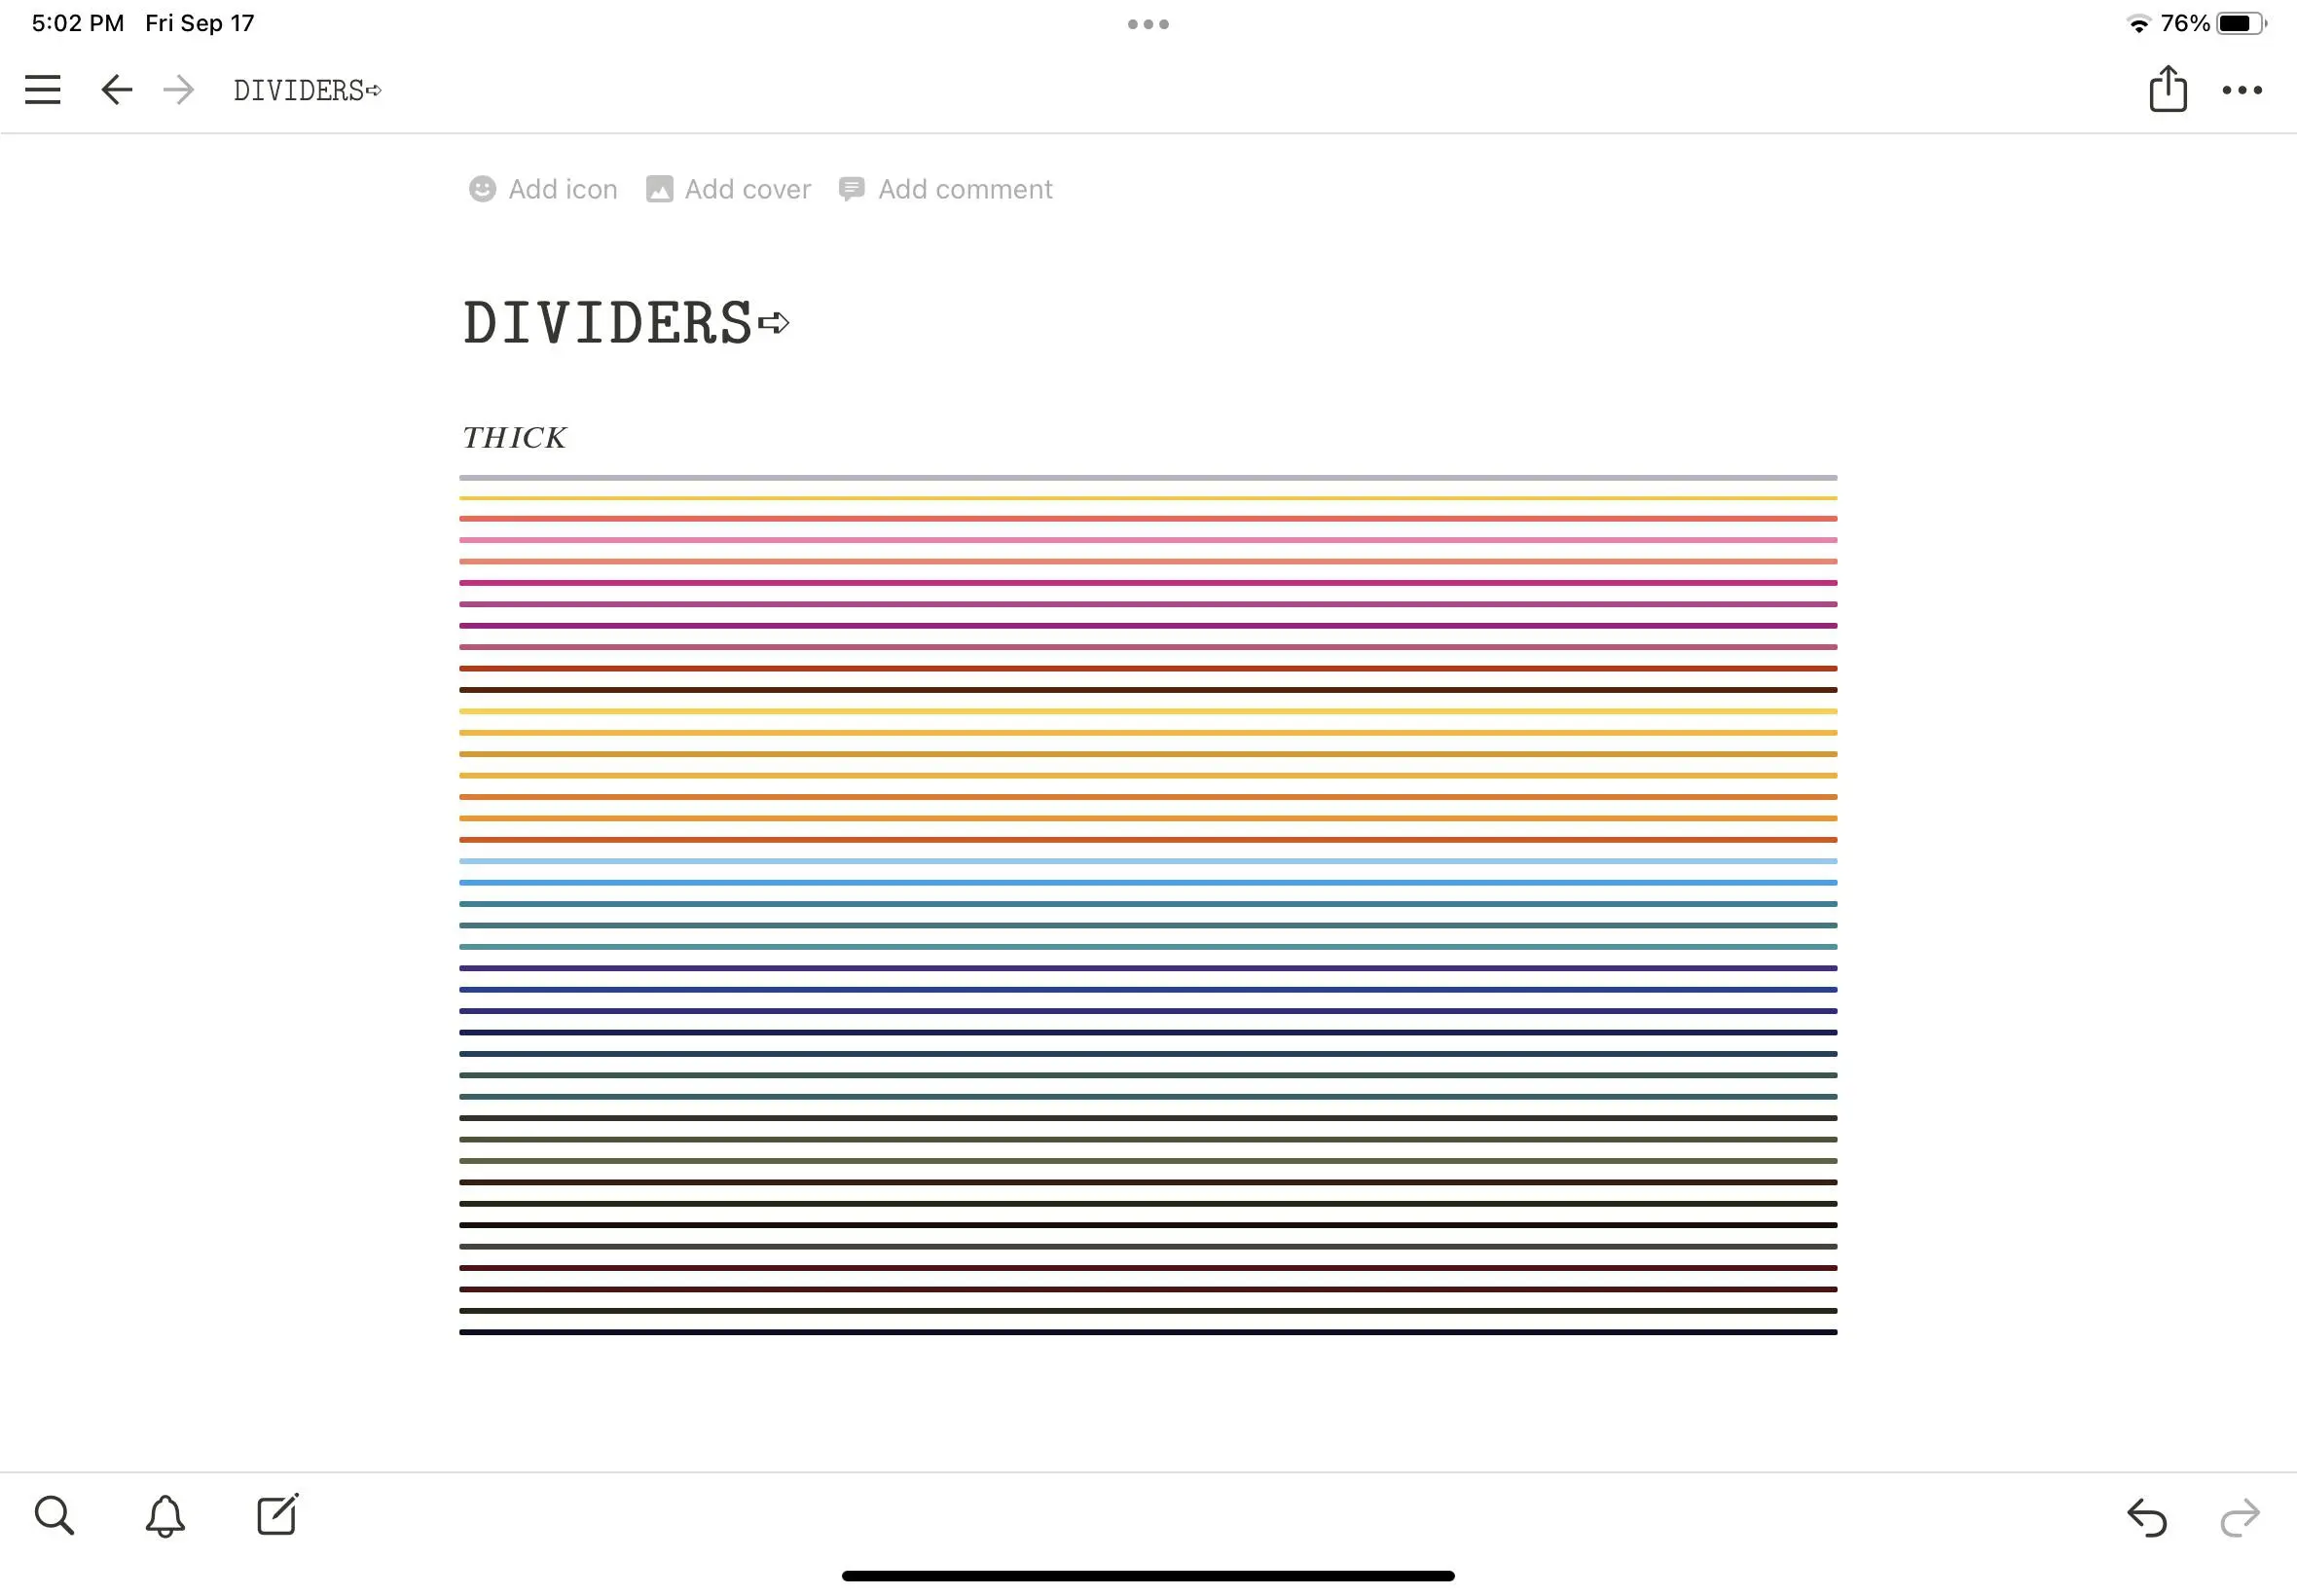 Free Notion Dividers image